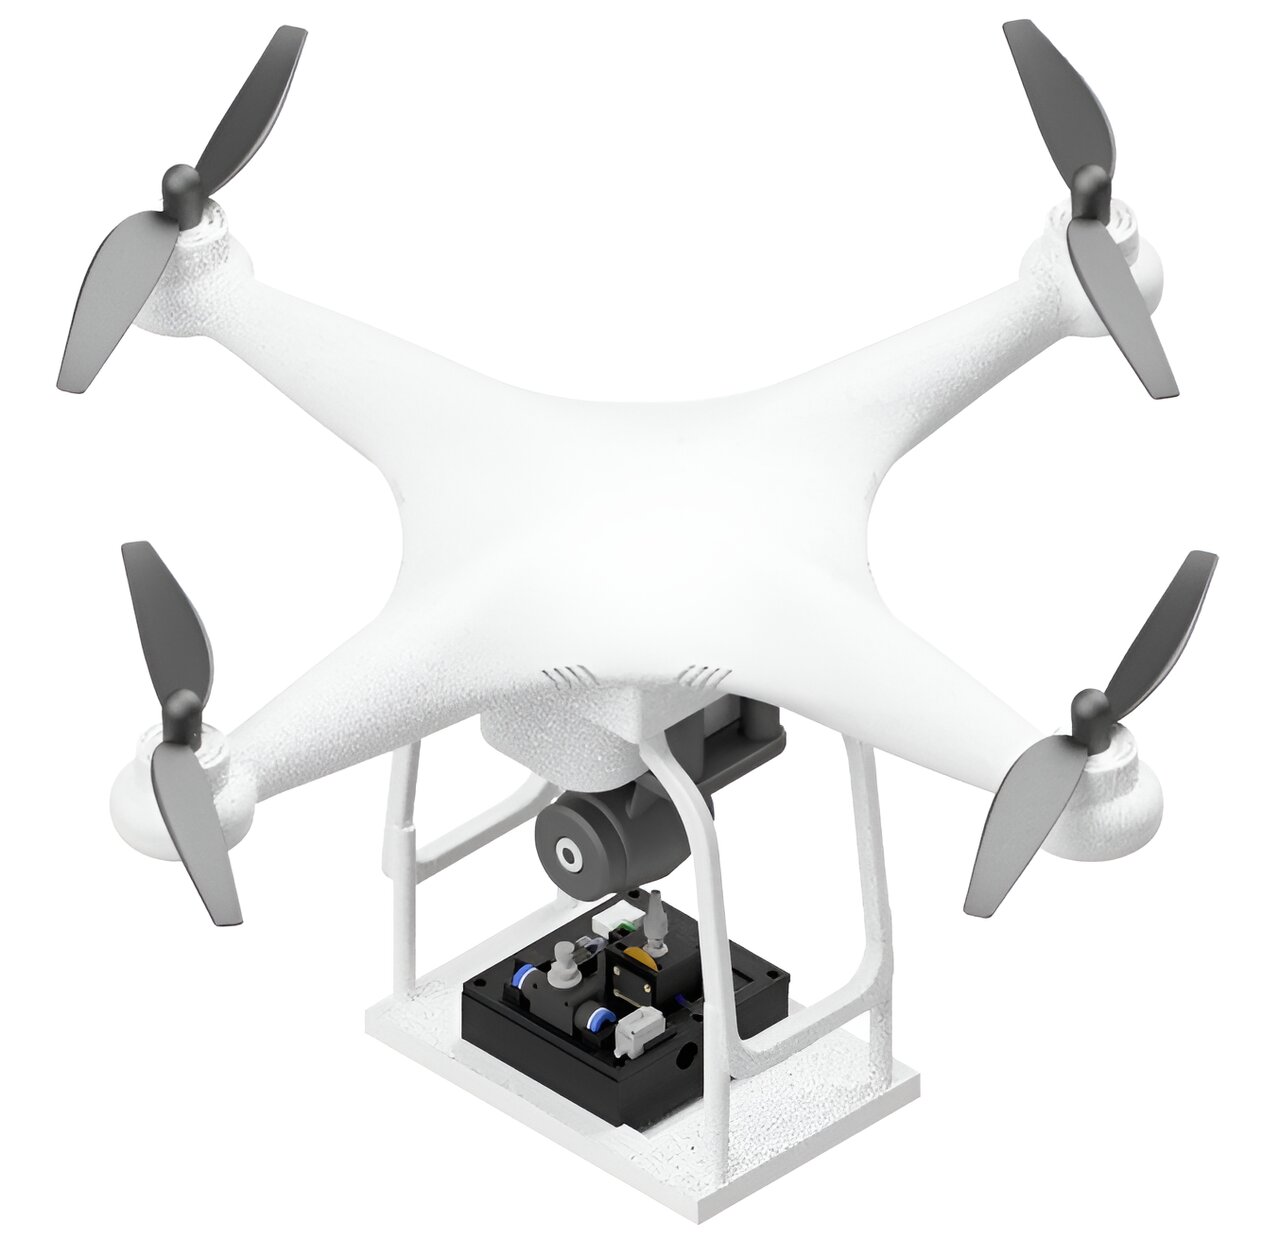 Lab-on-a-drone detects and analyzes pollutants from the sky